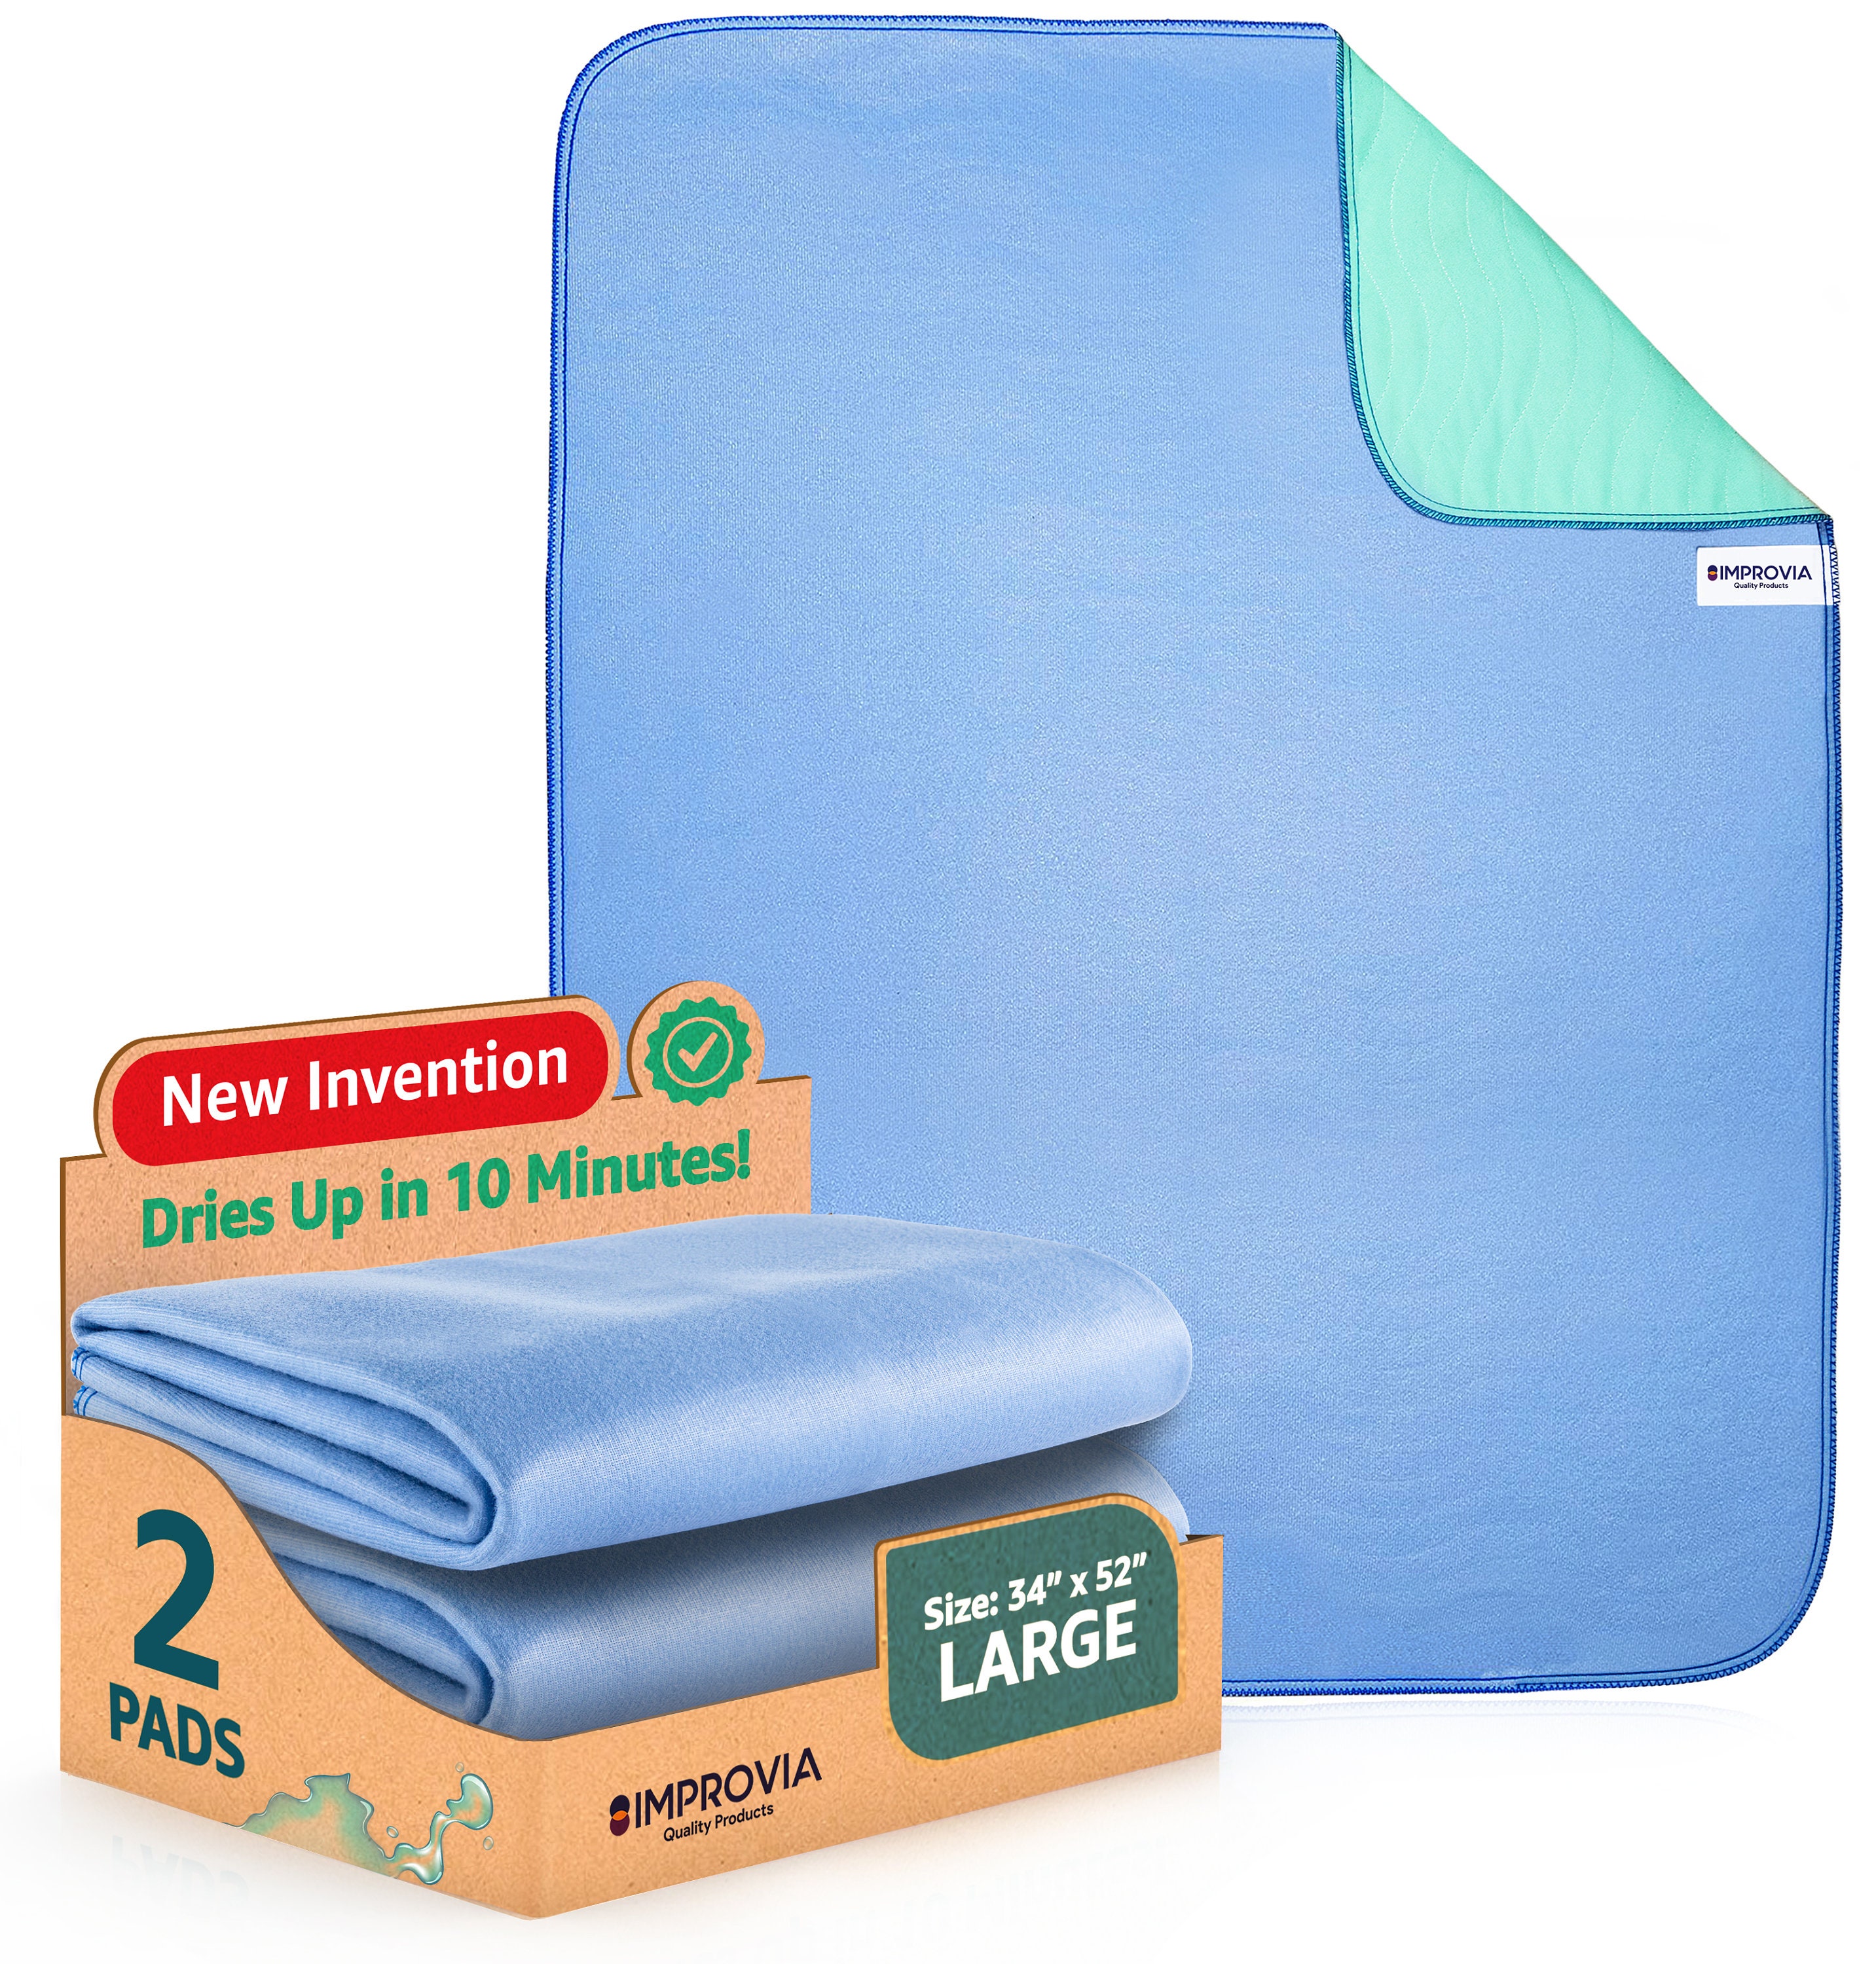 Washable Bed Pads/reusable Incontinence Underpads 30x36-4 Pack Blue, Green,  Tan and Pink Ideal for Children and Adults 